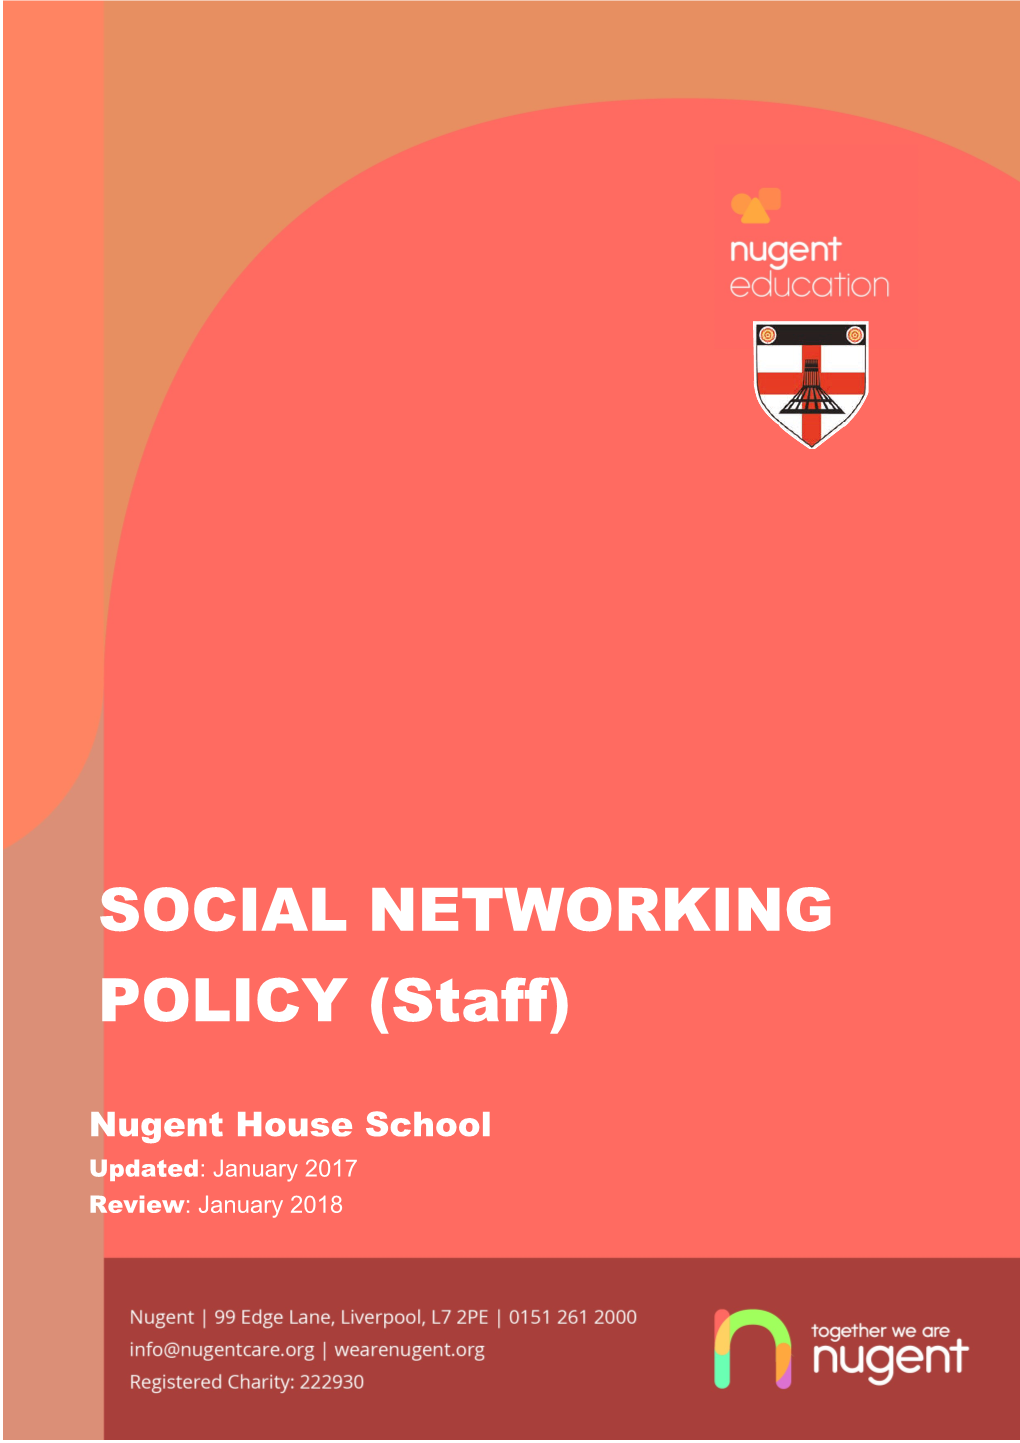 Nugent House School Recognises the Growing Popularity of Social Networking Sites Such As